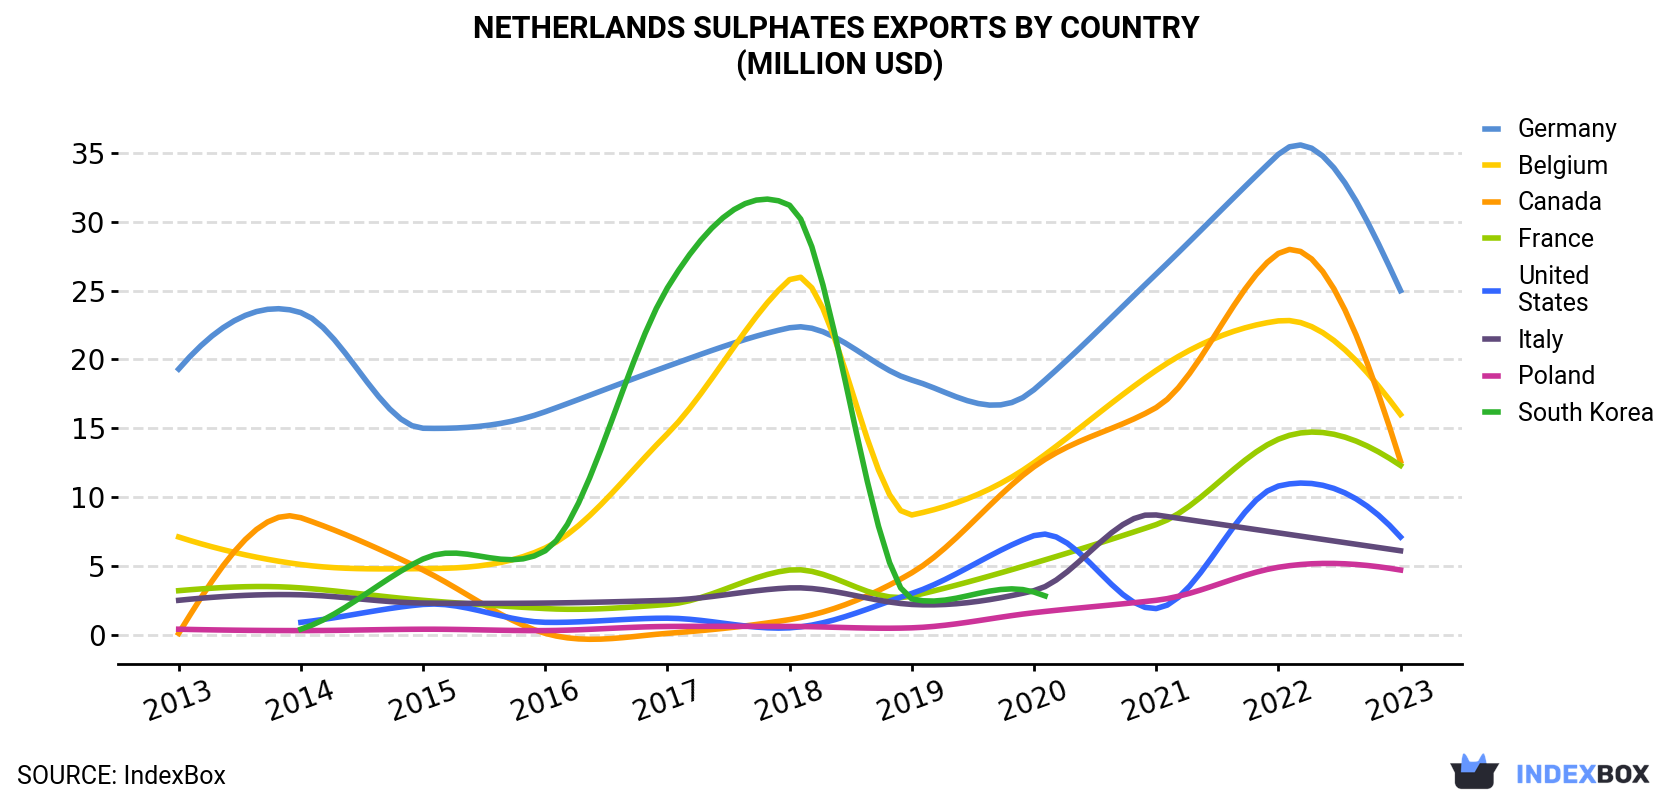 Netherlands Sulphates Exports By Country (Million USD)